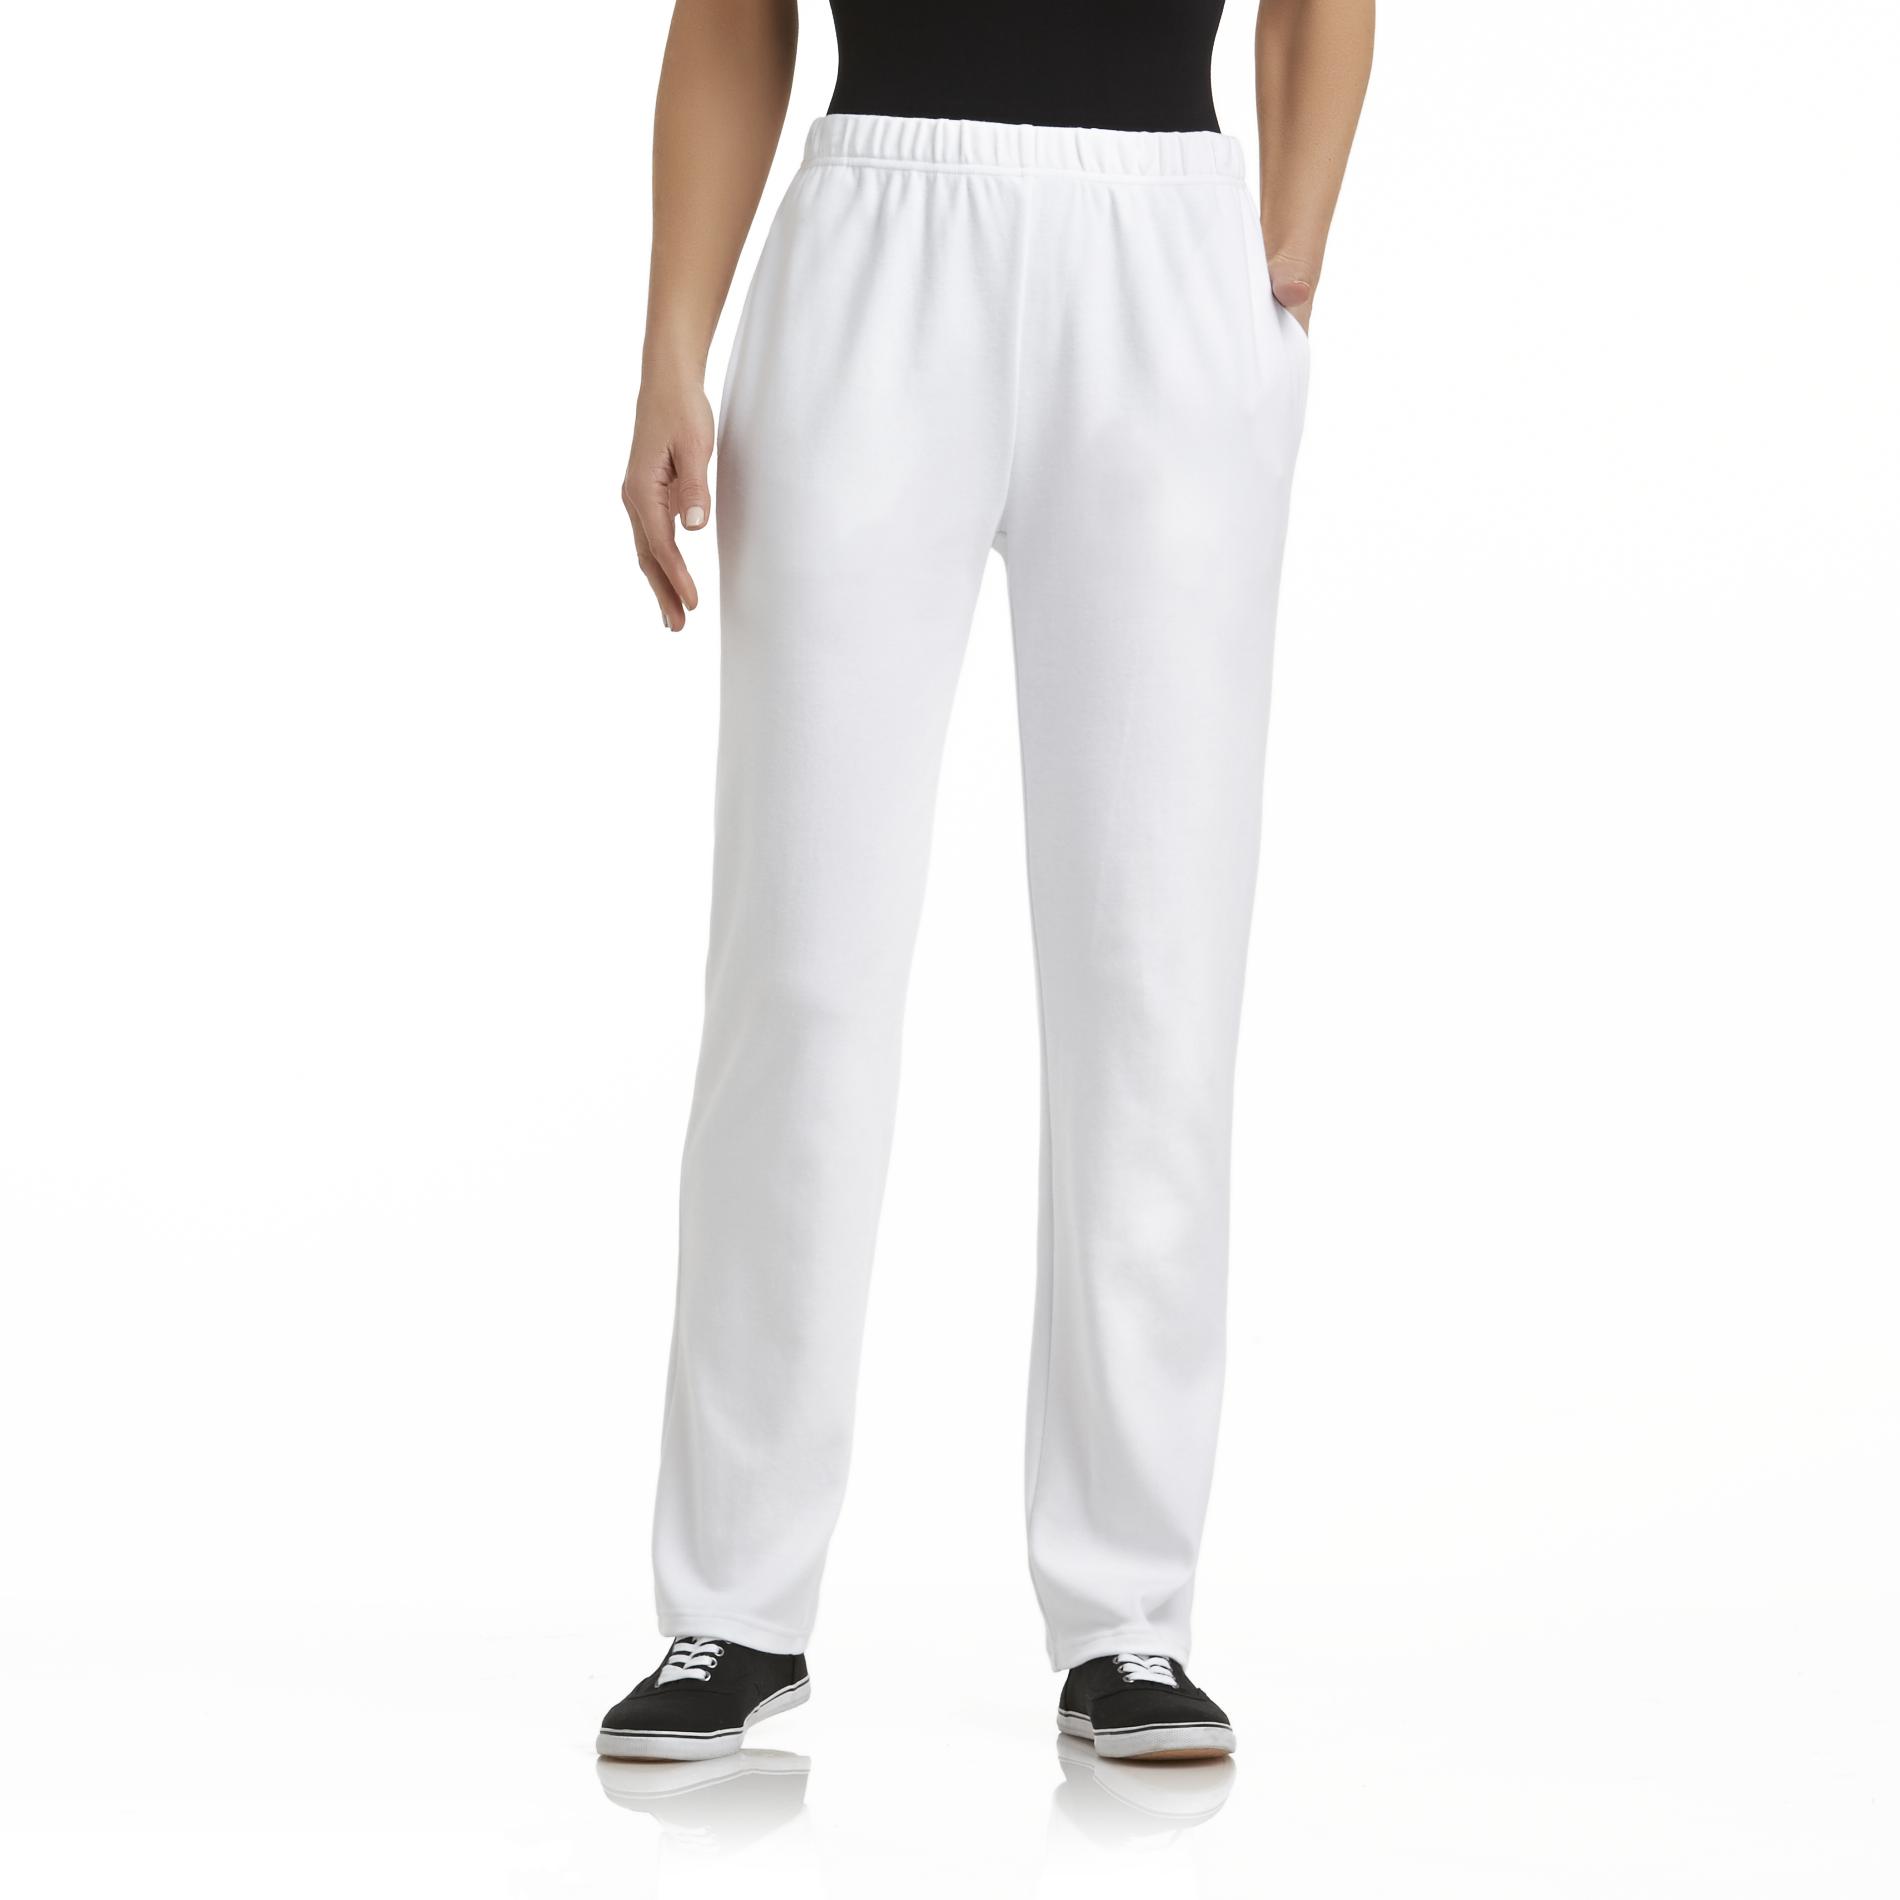 Basic Editions Women's Pull On Knit Pants